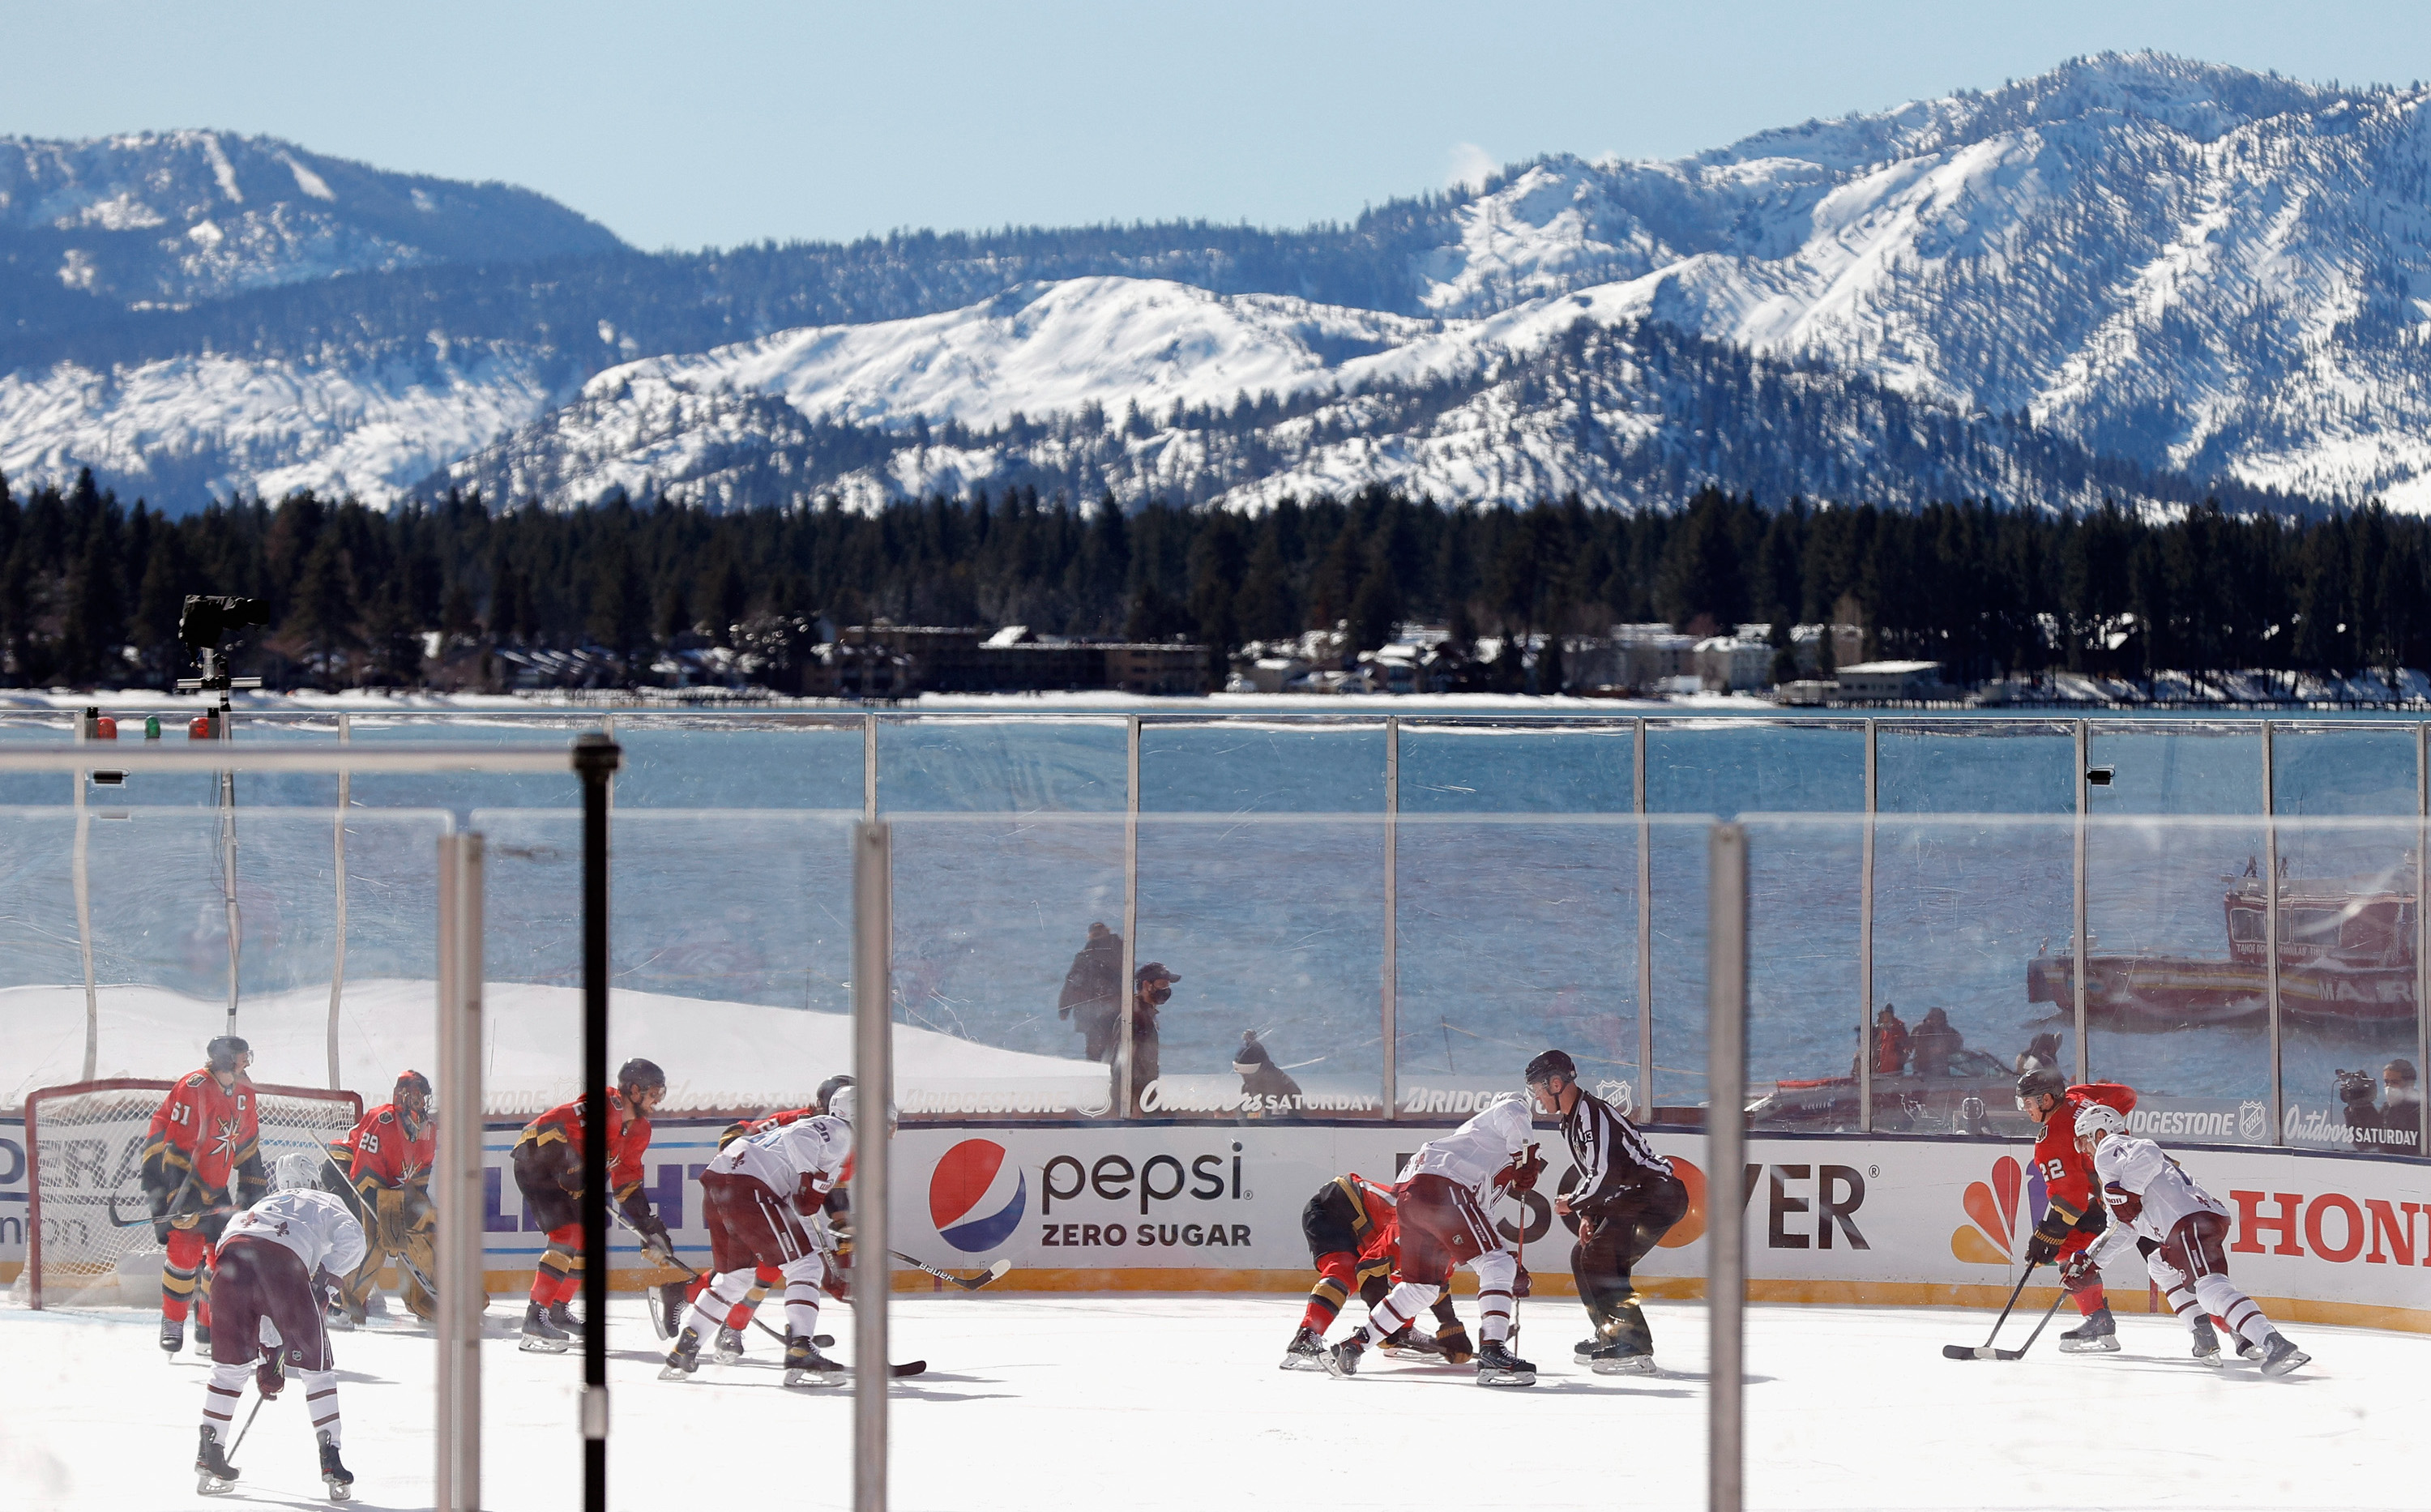 STATELINE, NEVADA - FEBRUARY 20: The Vegas Golden Knights skate against the Colorado Avalanche during the NHL Outdoors at Lake Tahoe at the Edgewood Tahoe Resort on February 20, 2021 in Stateline, Nevada. (Photo by Ezra Shaw/Getty Images)